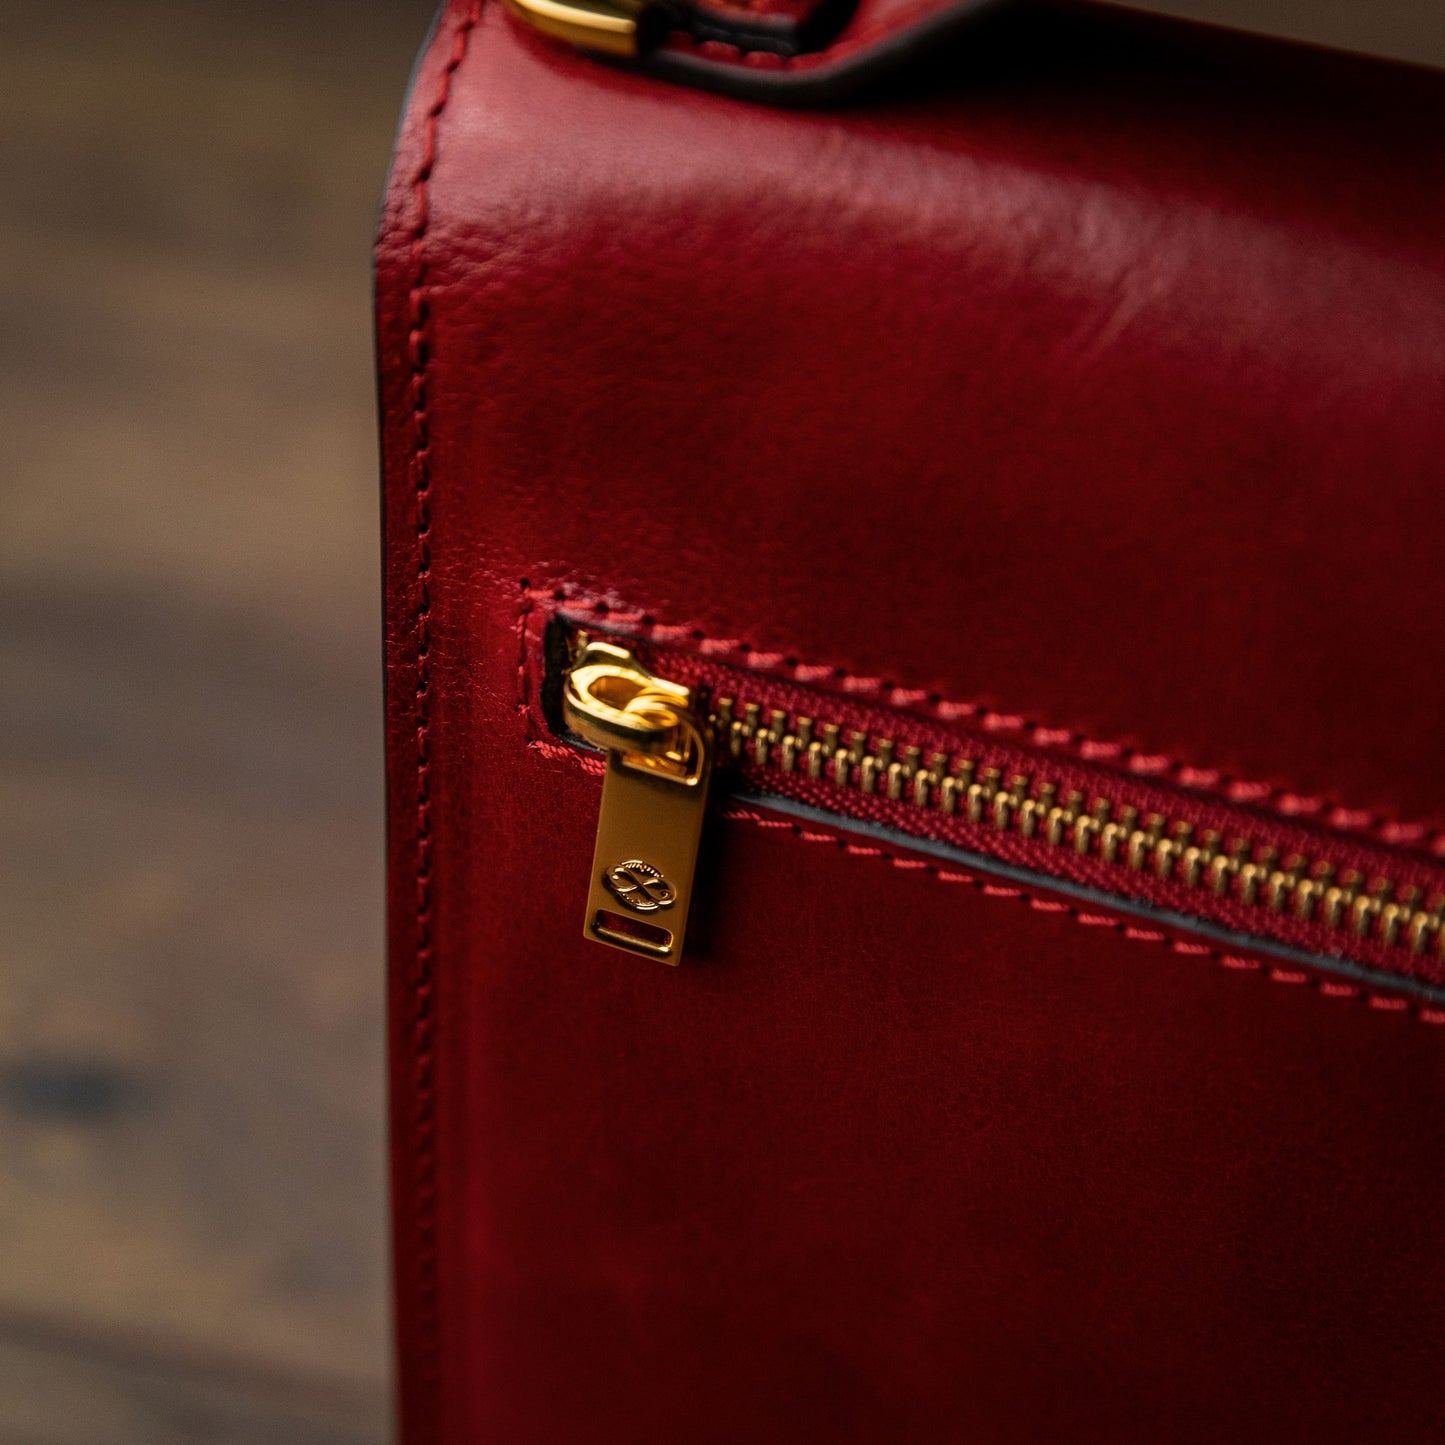 Small Leather Briefcase - Walden